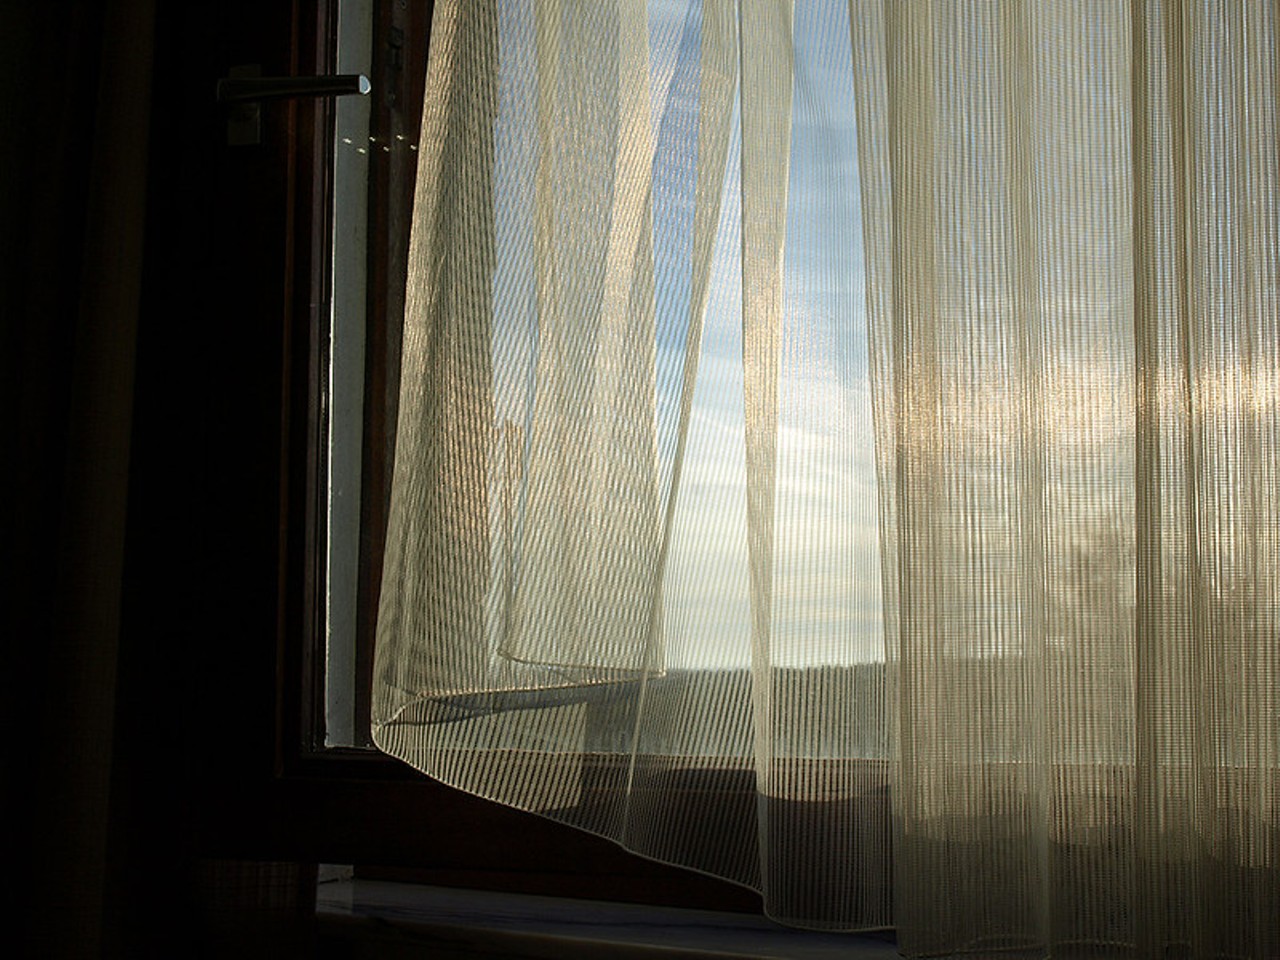 Open your curtains.
UV light kills viruses. The more you natural light you have in your house, the better.
Photo credit: Daniel Stark / Flickr